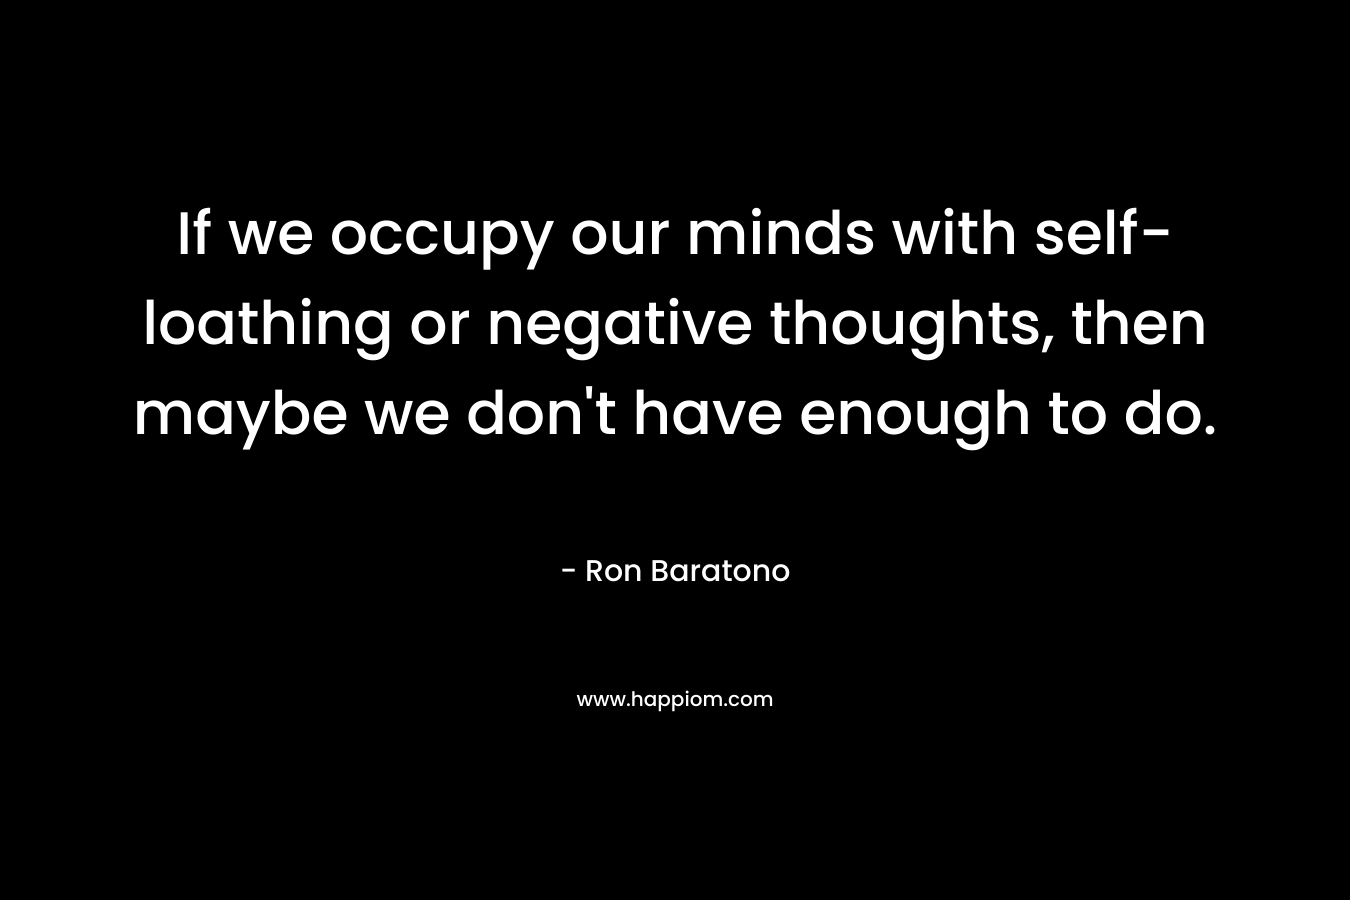 If we occupy our minds with self-loathing or negative thoughts, then maybe we don’t have enough to do. – Ron Baratono